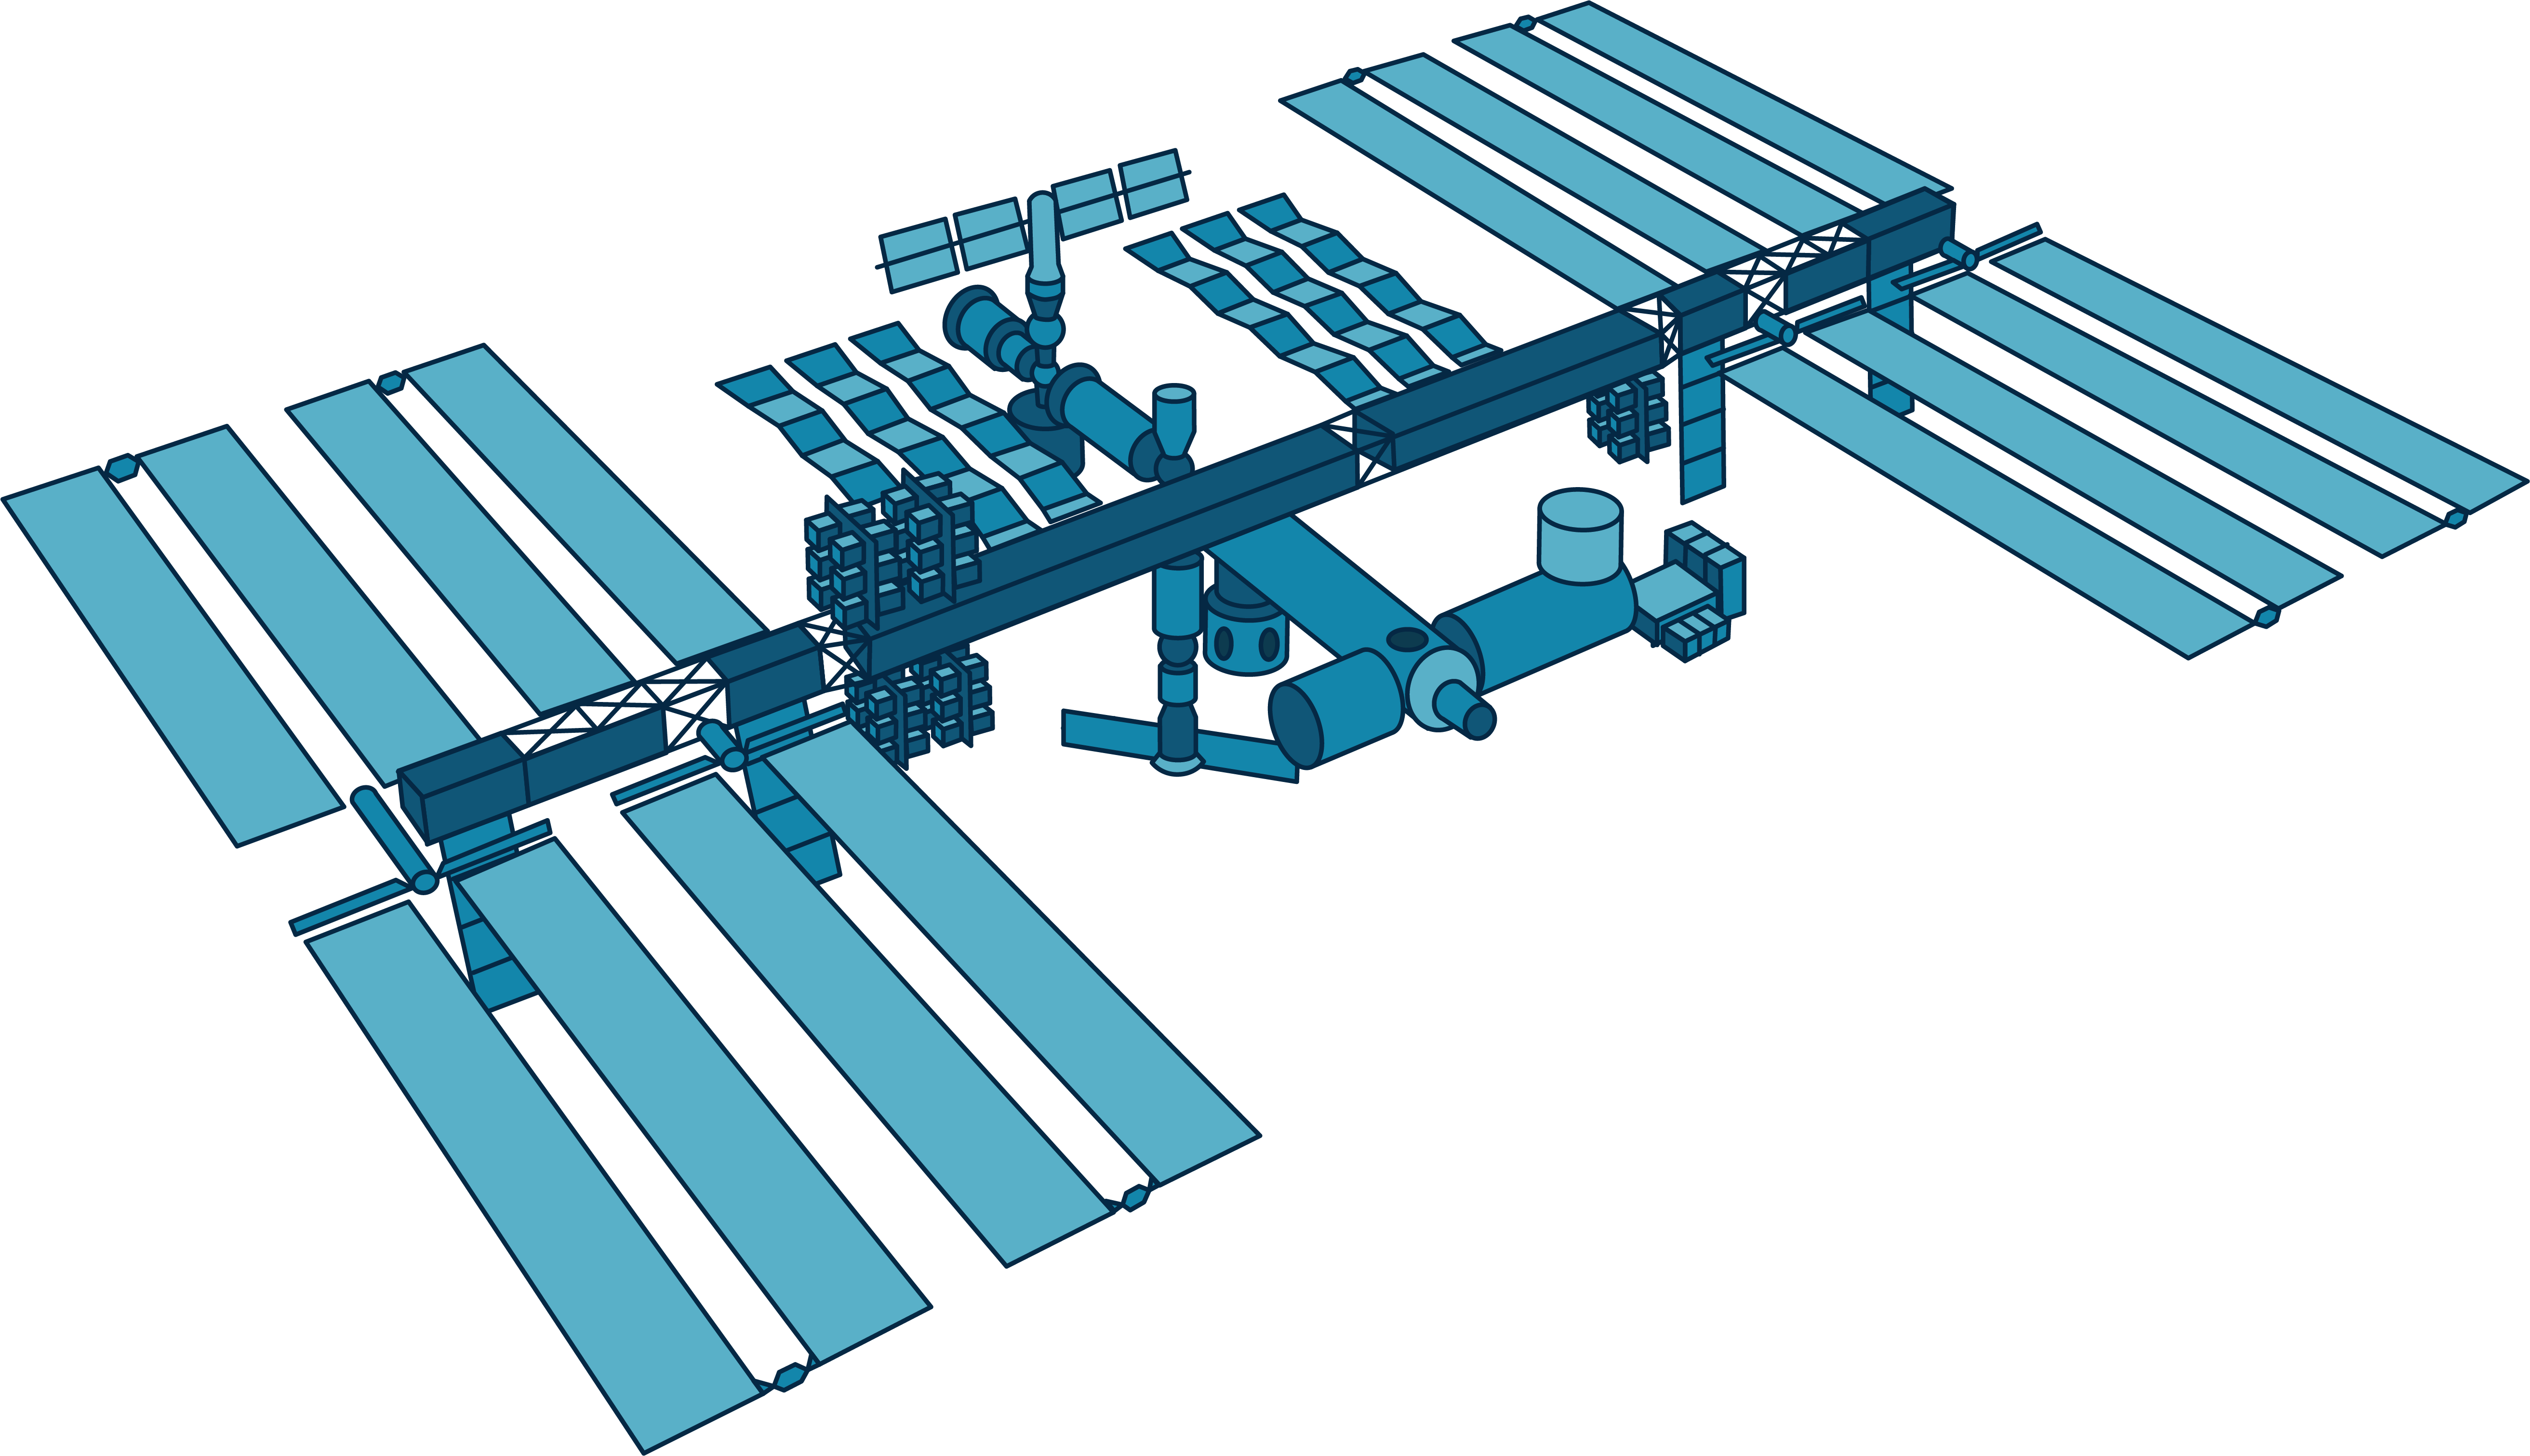 This illustration shows the International Space Station in shades of blue. The space station has a thin middle body made up of different small modules. Extending out from the middle body of the station, each side is flanked by a "wing" made up of a series of long, rectangular solar array pieces.